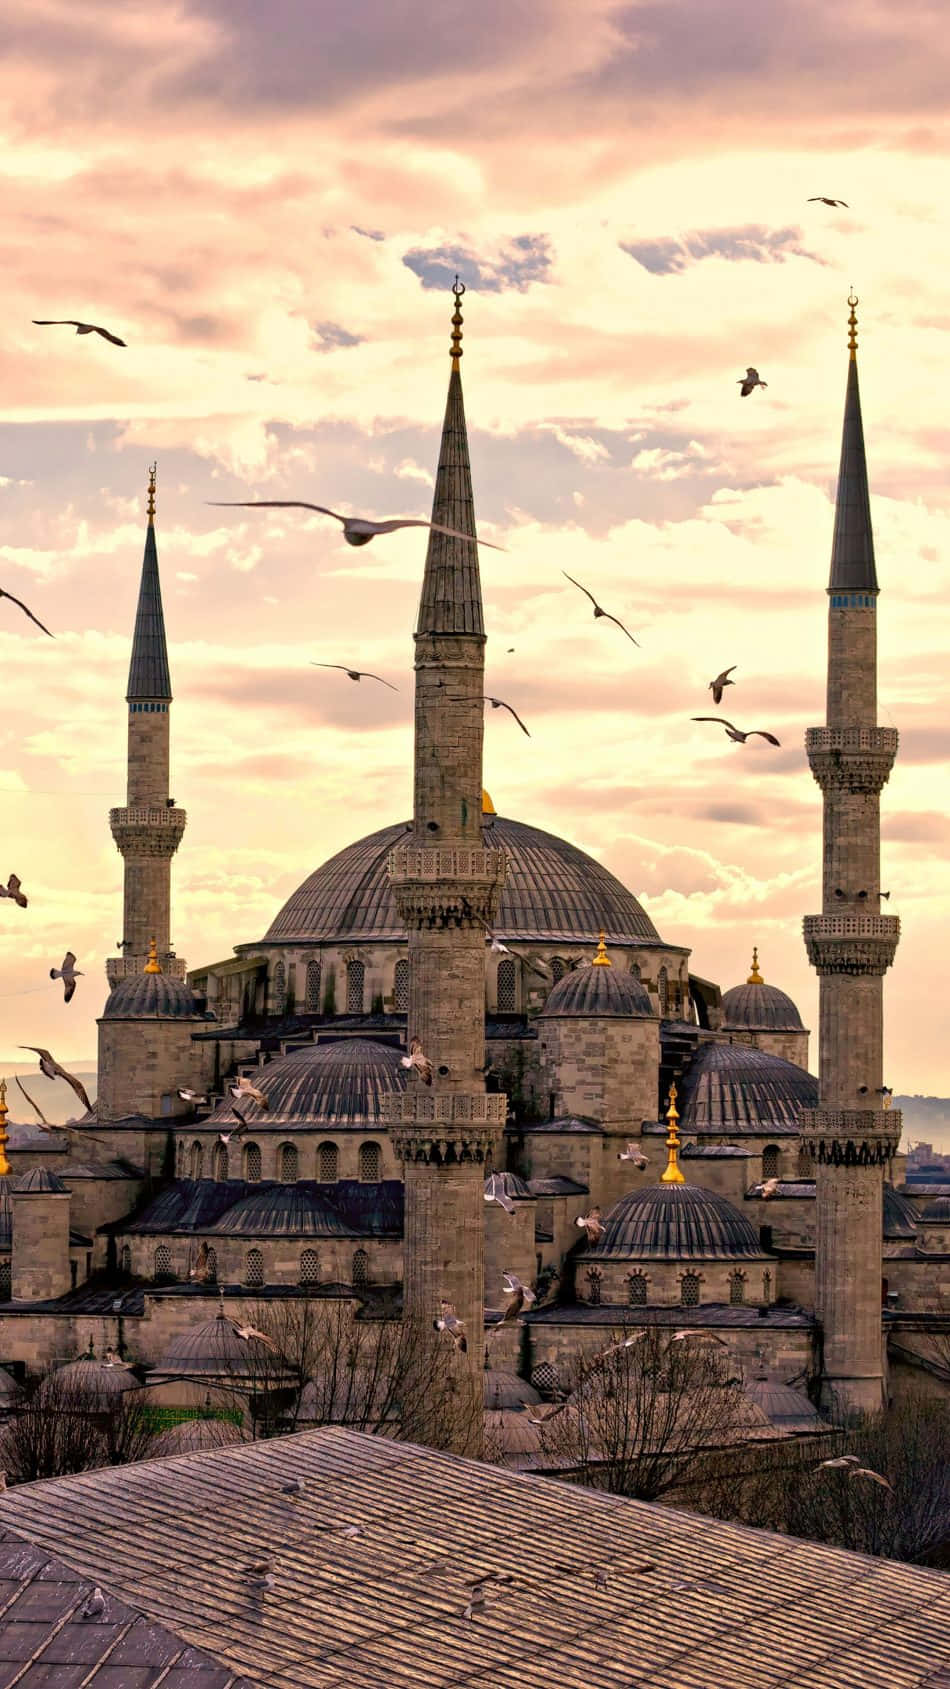 Blue Mosque With Flying Birds Portrait Wallpaper